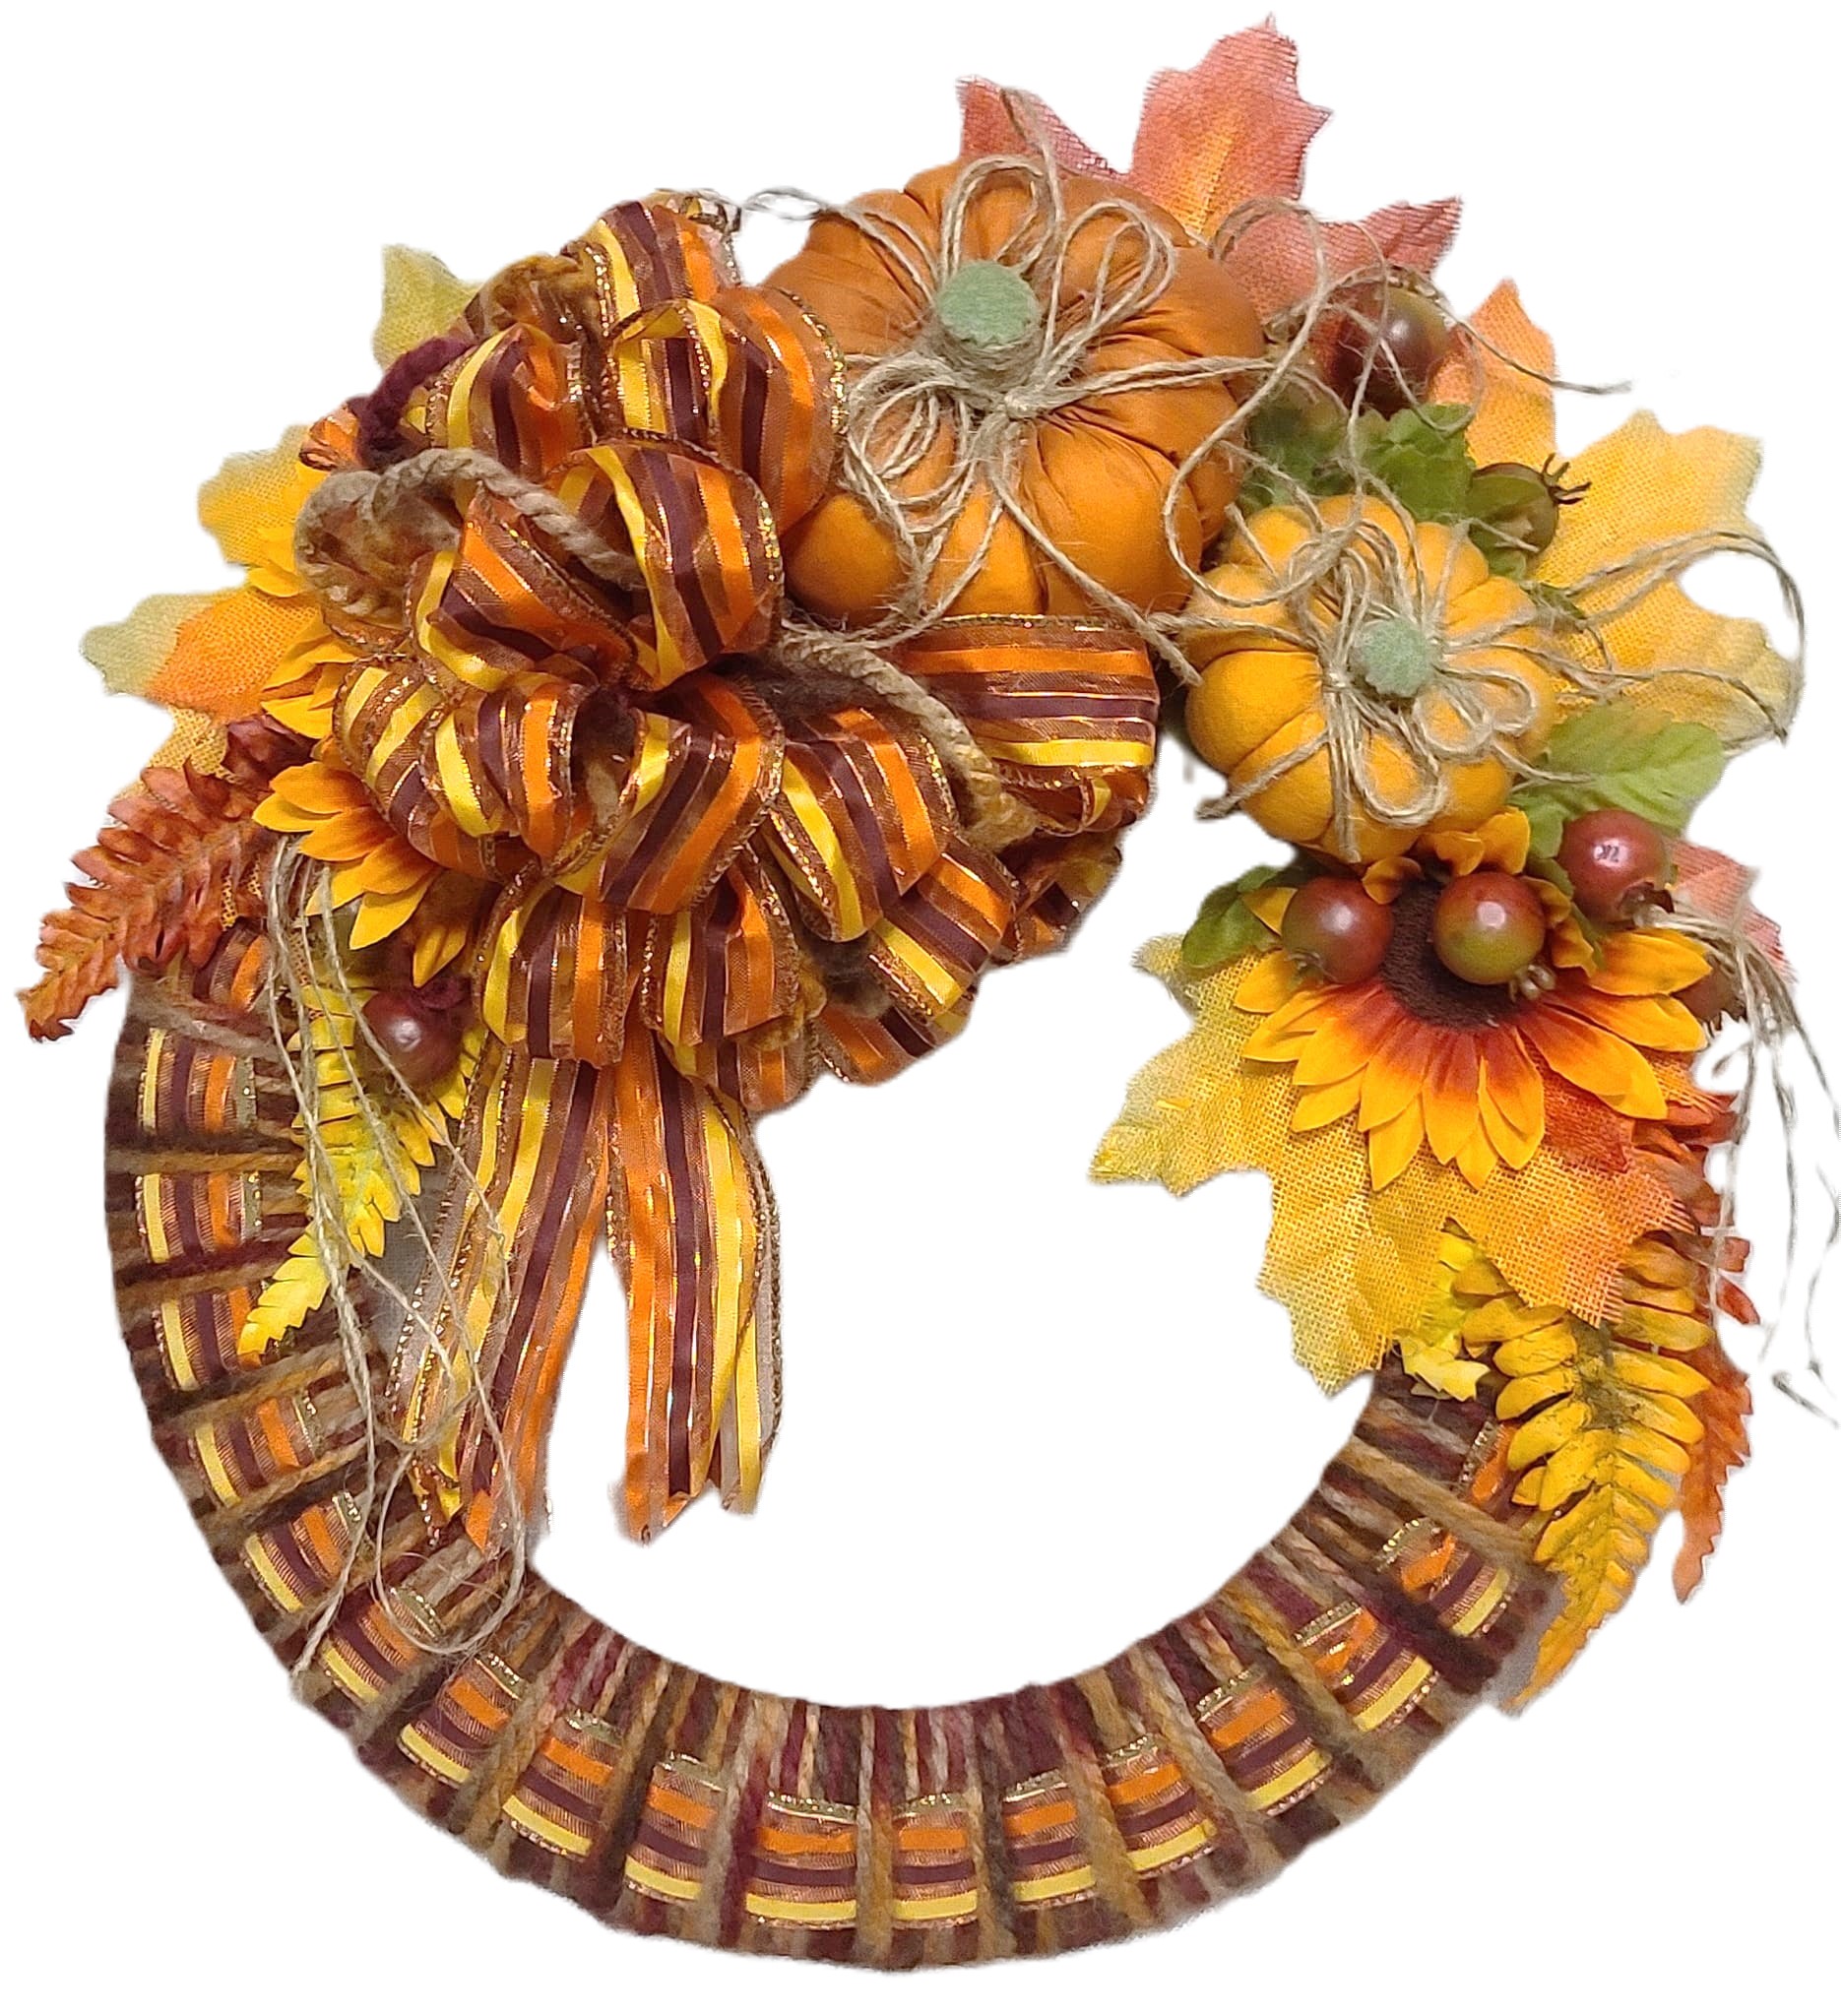 Yarn harvest wreath with pumpkins and foil foilage - Click Image to Close